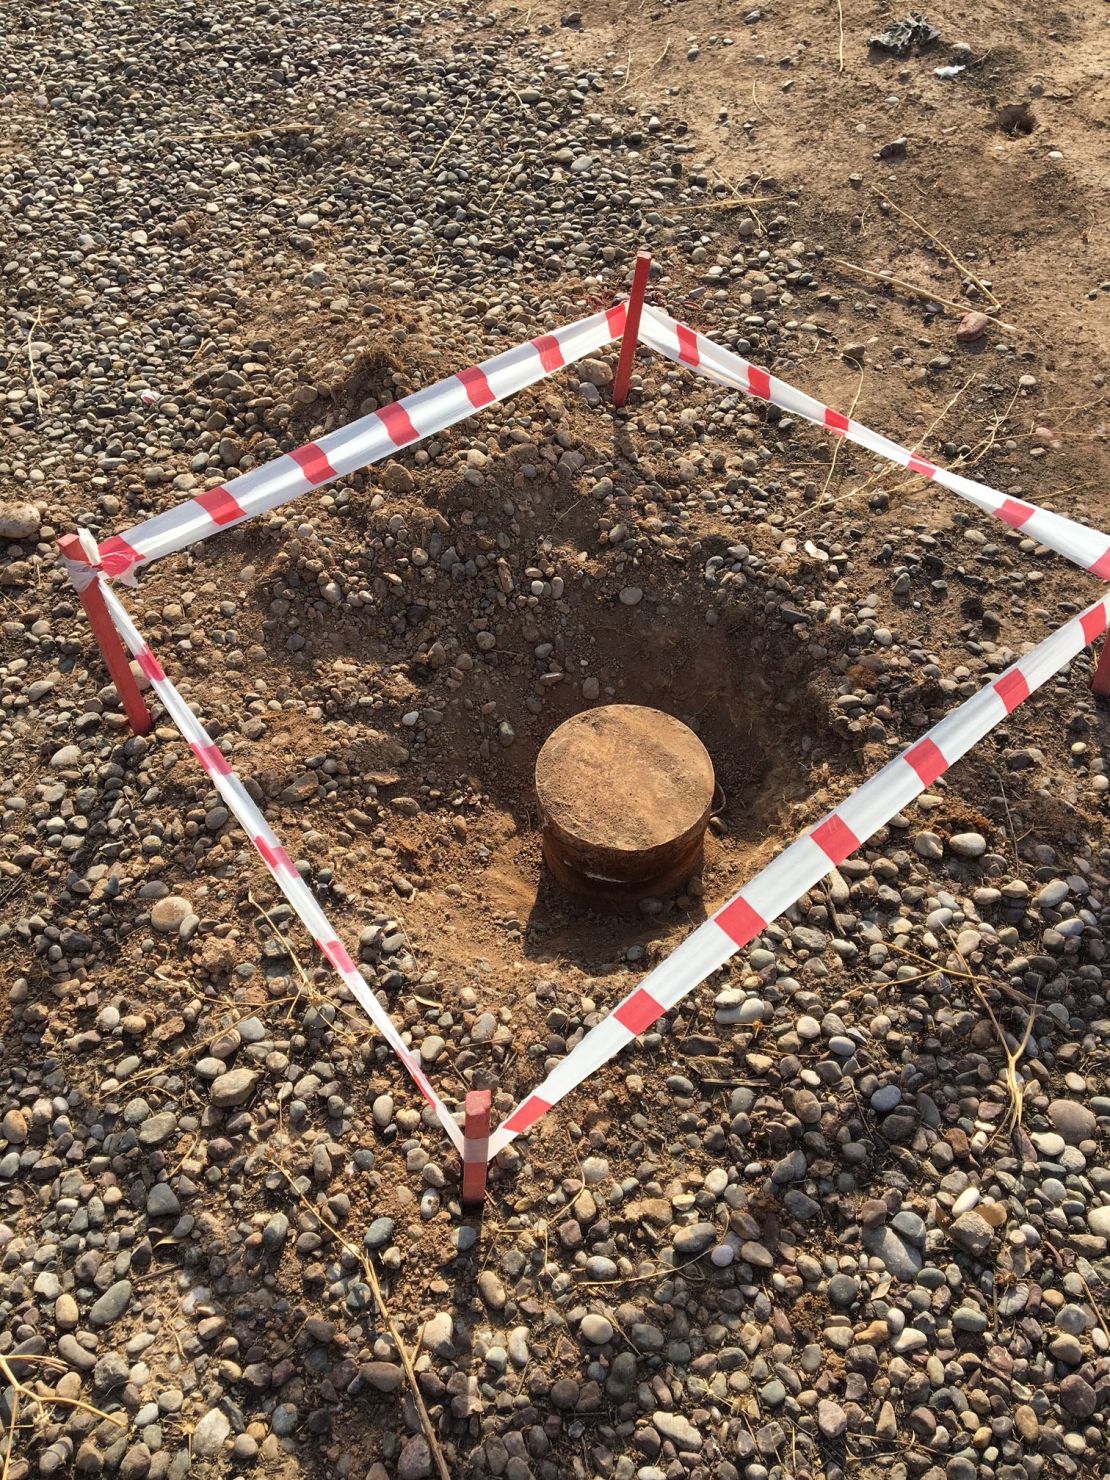 An unexploded mine is sectioned off by the MAG.